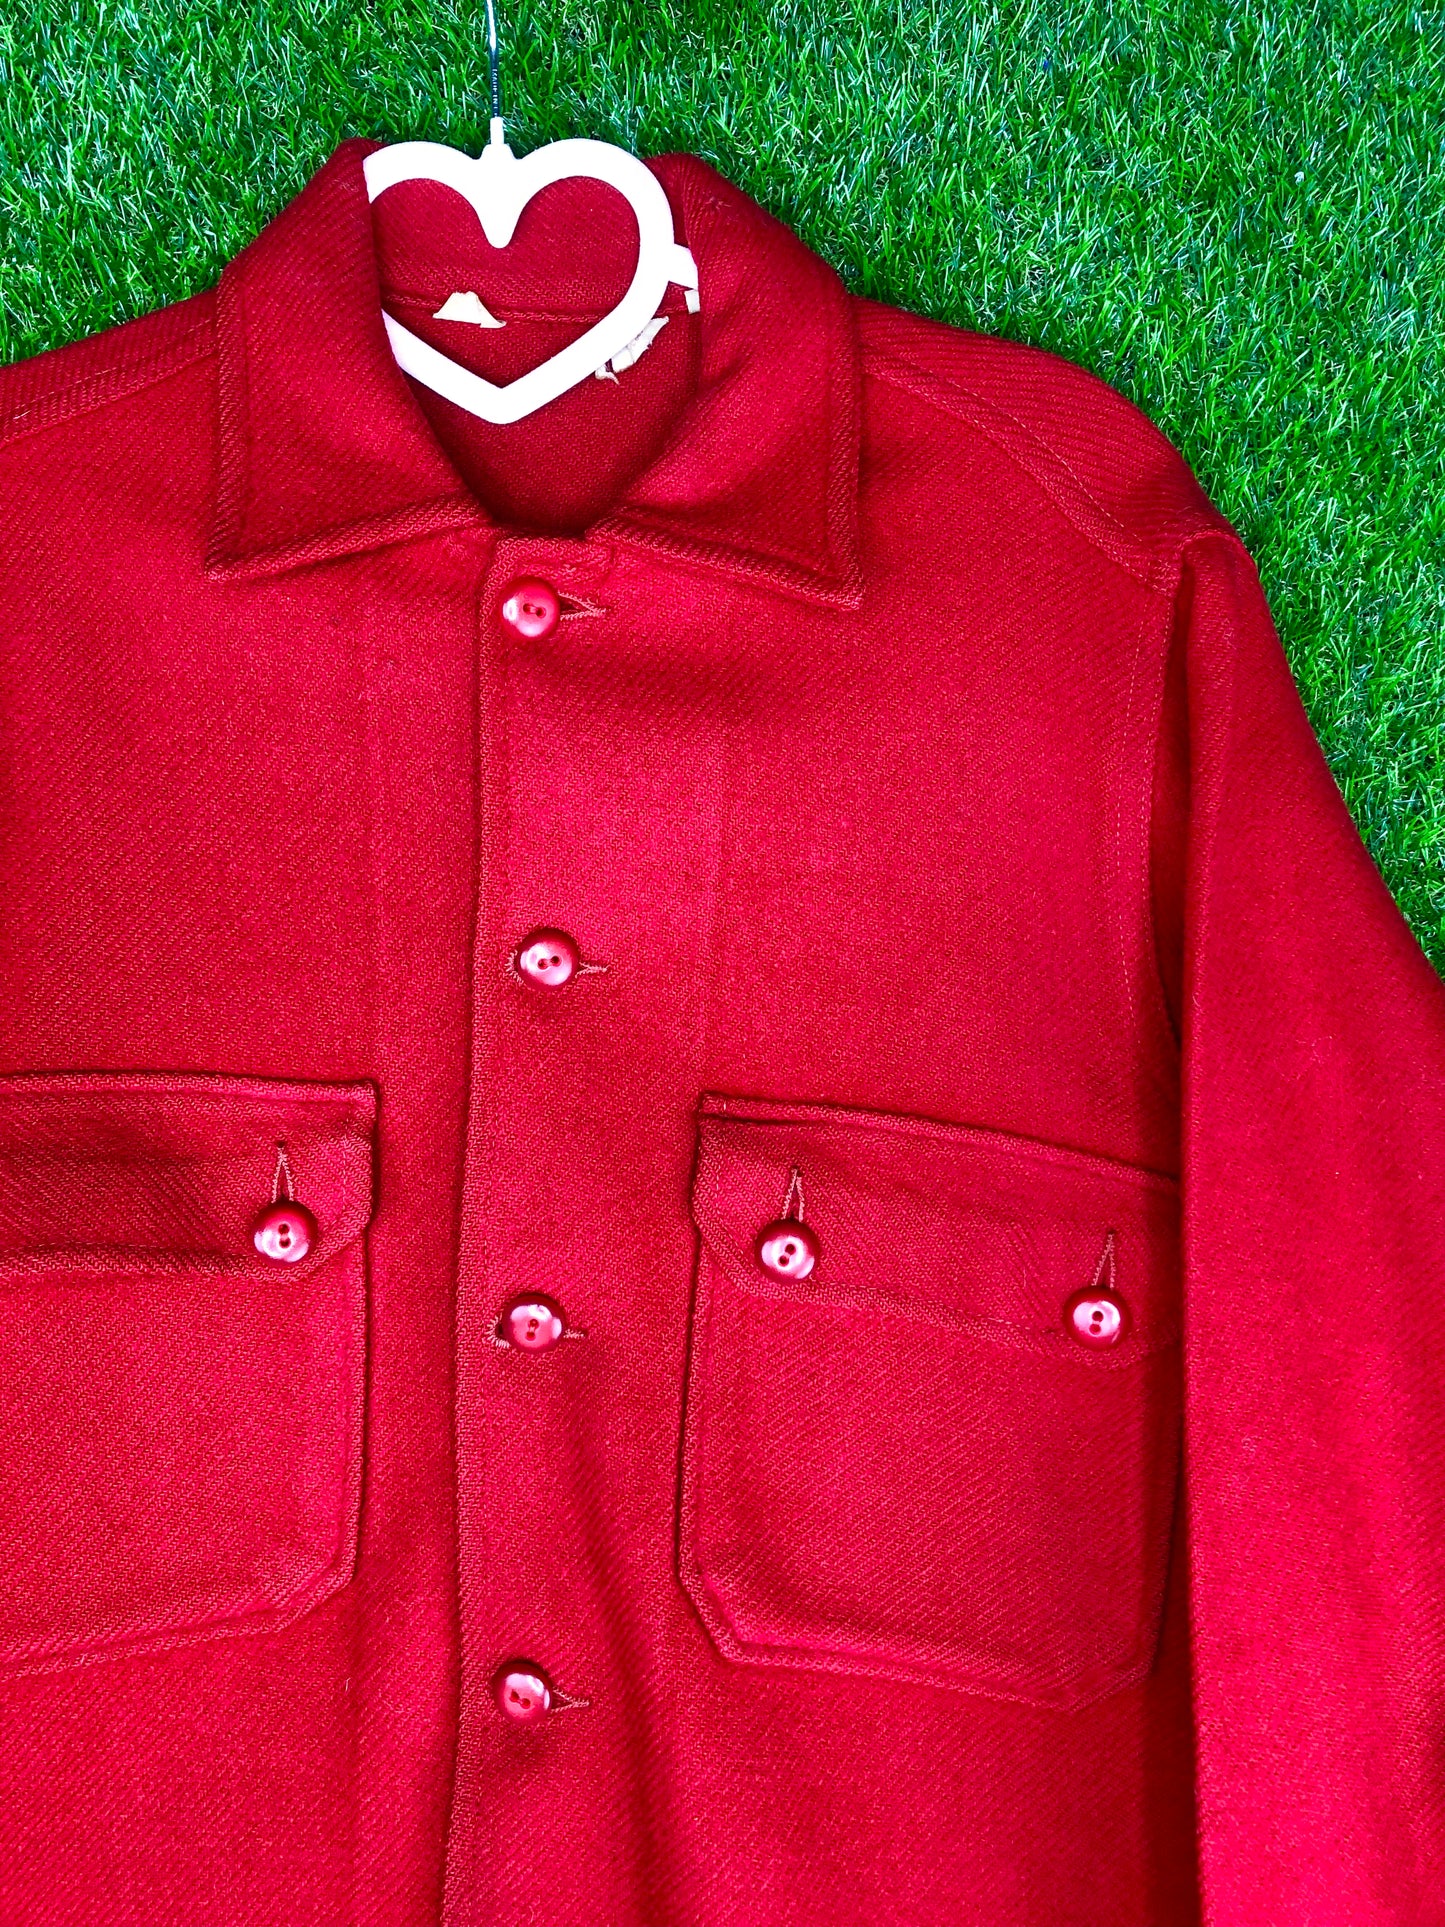 1970's Tomato Red Boy Scouts Jacket